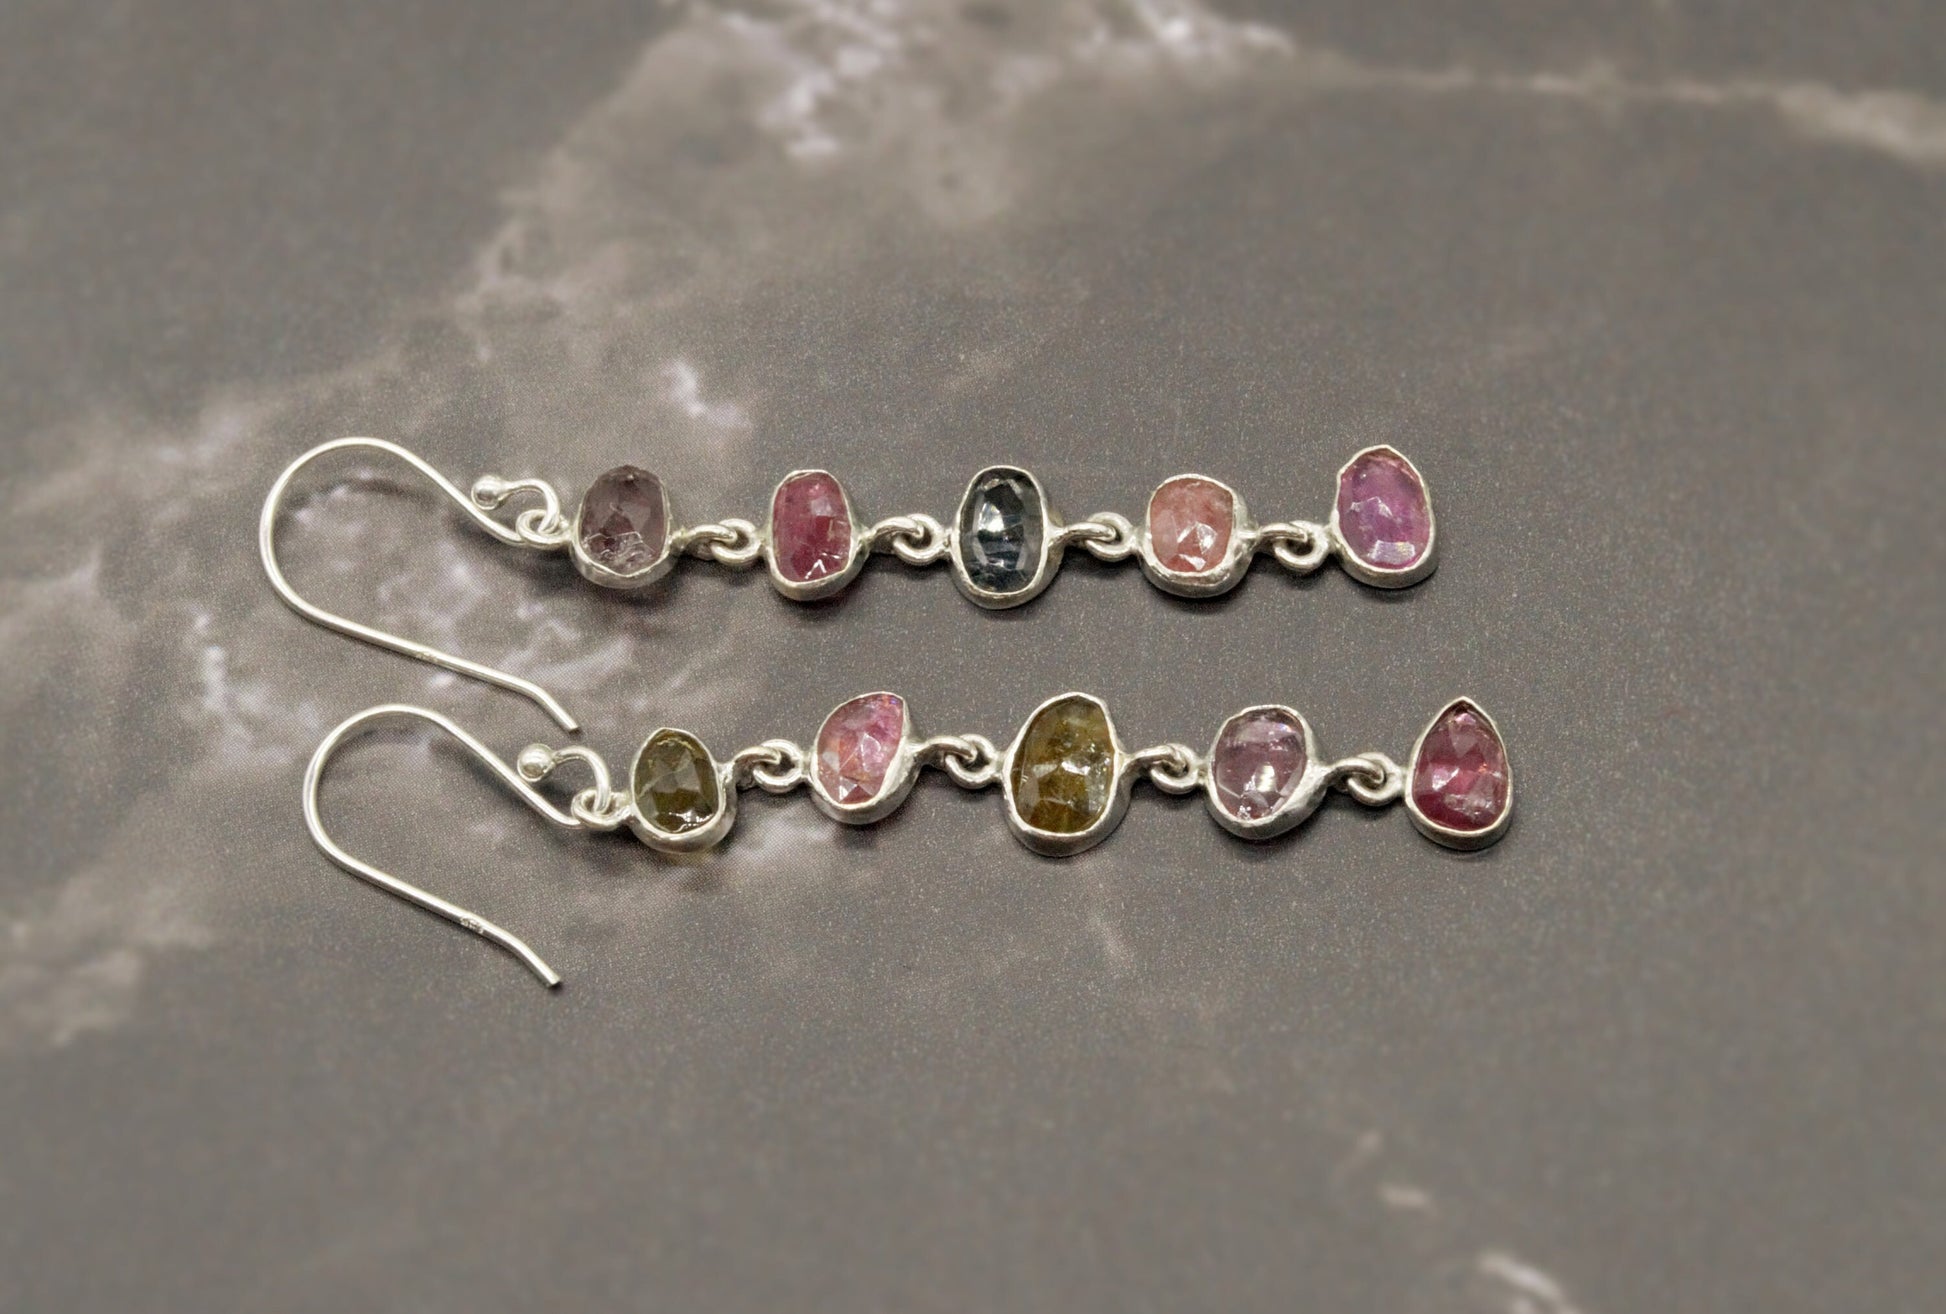 Mixed Tourmaline Earrings, Green Pink Tourmaline Sterling Silver, 925 Silver, Dangle Earrings, Gift for her